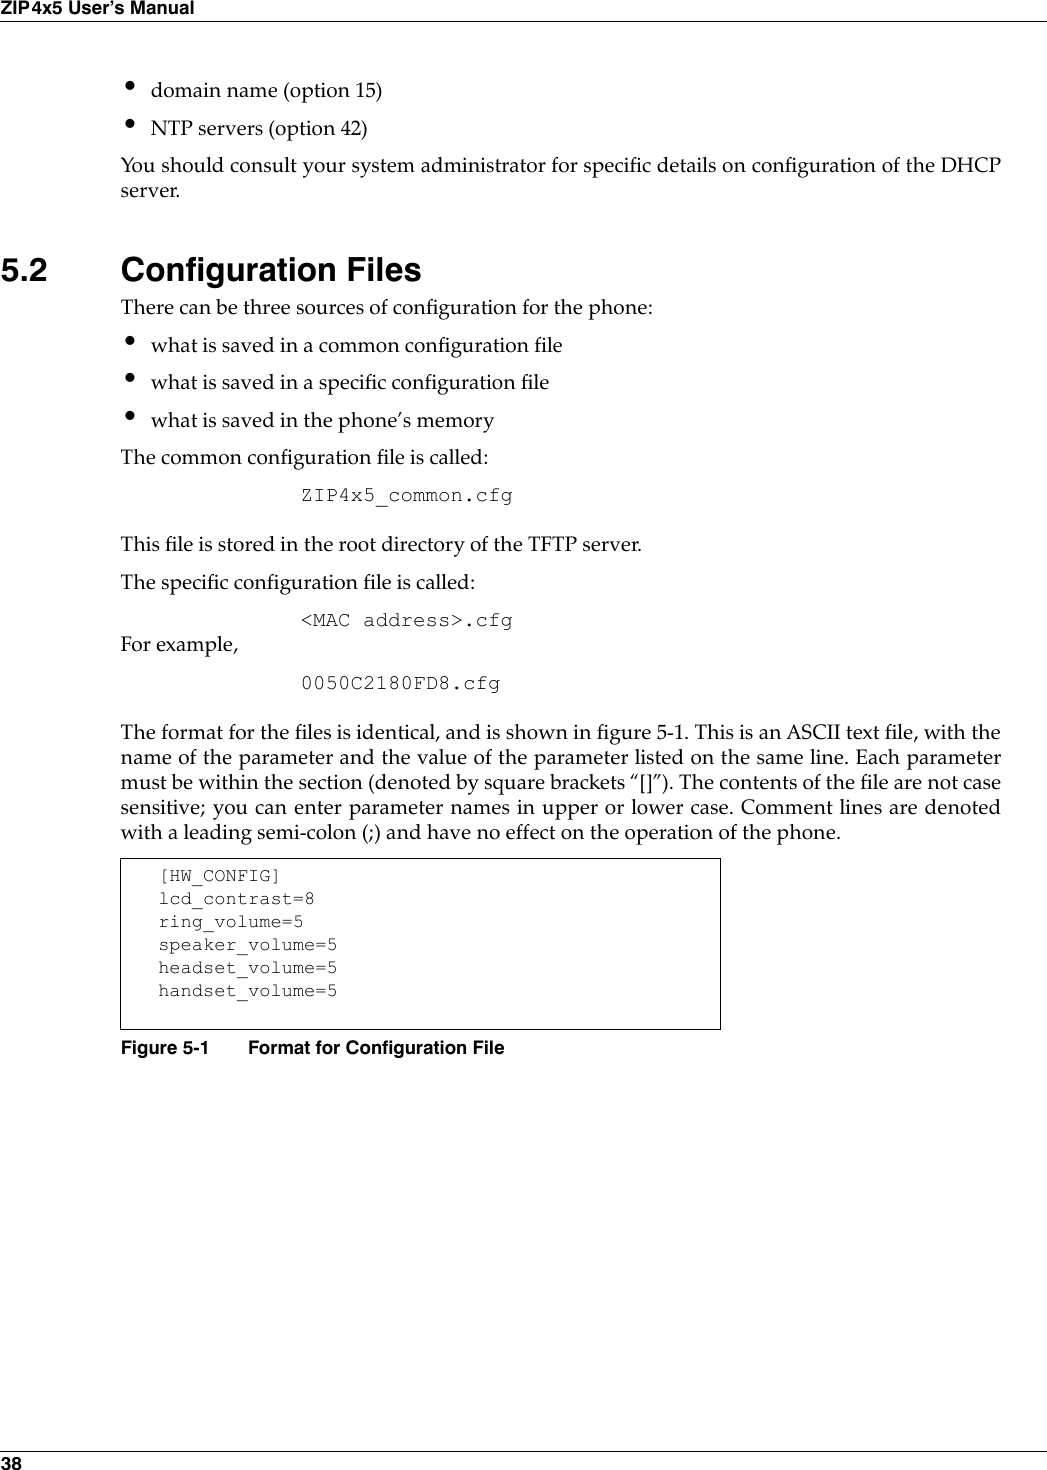 38ZIP4x5 User’s Manual•domain name (option 15)•NTP servers (option 42)You should consult your system administrator for specific details on configuration of the DHCPserver.5.2 Configuration FilesThere can be three sources of configuration for the phone:•what is saved in a common configuration file•what is saved in a specific configuration file•what is saved in the phone’s memoryThe common configuration file is called:ZIP4x5_common.cfgThis file is stored in the root directory of the TFTP server.The specific configuration file is called:&lt;MAC address&gt;.cfgFor example,0050C2180FD8.cfgThe format for the files is identical, and is shown in figure 5-1. This is an ASCII text file, with thename of the parameter and the value of the parameter listed on the same line. Each parametermust be within the section (denoted by square brackets “[]”). The contents of the file are not casesensitive; you can enter parameter names in upper or lower case. Comment lines are denotedwith a leading semi-colon (;) and have no effect on the operation of the phone.[HW_CONFIG]lcd_contrast=8ring_volume=5speaker_volume=5headset_volume=5handset_volume=5Figure 5-1 Format for Configuration File